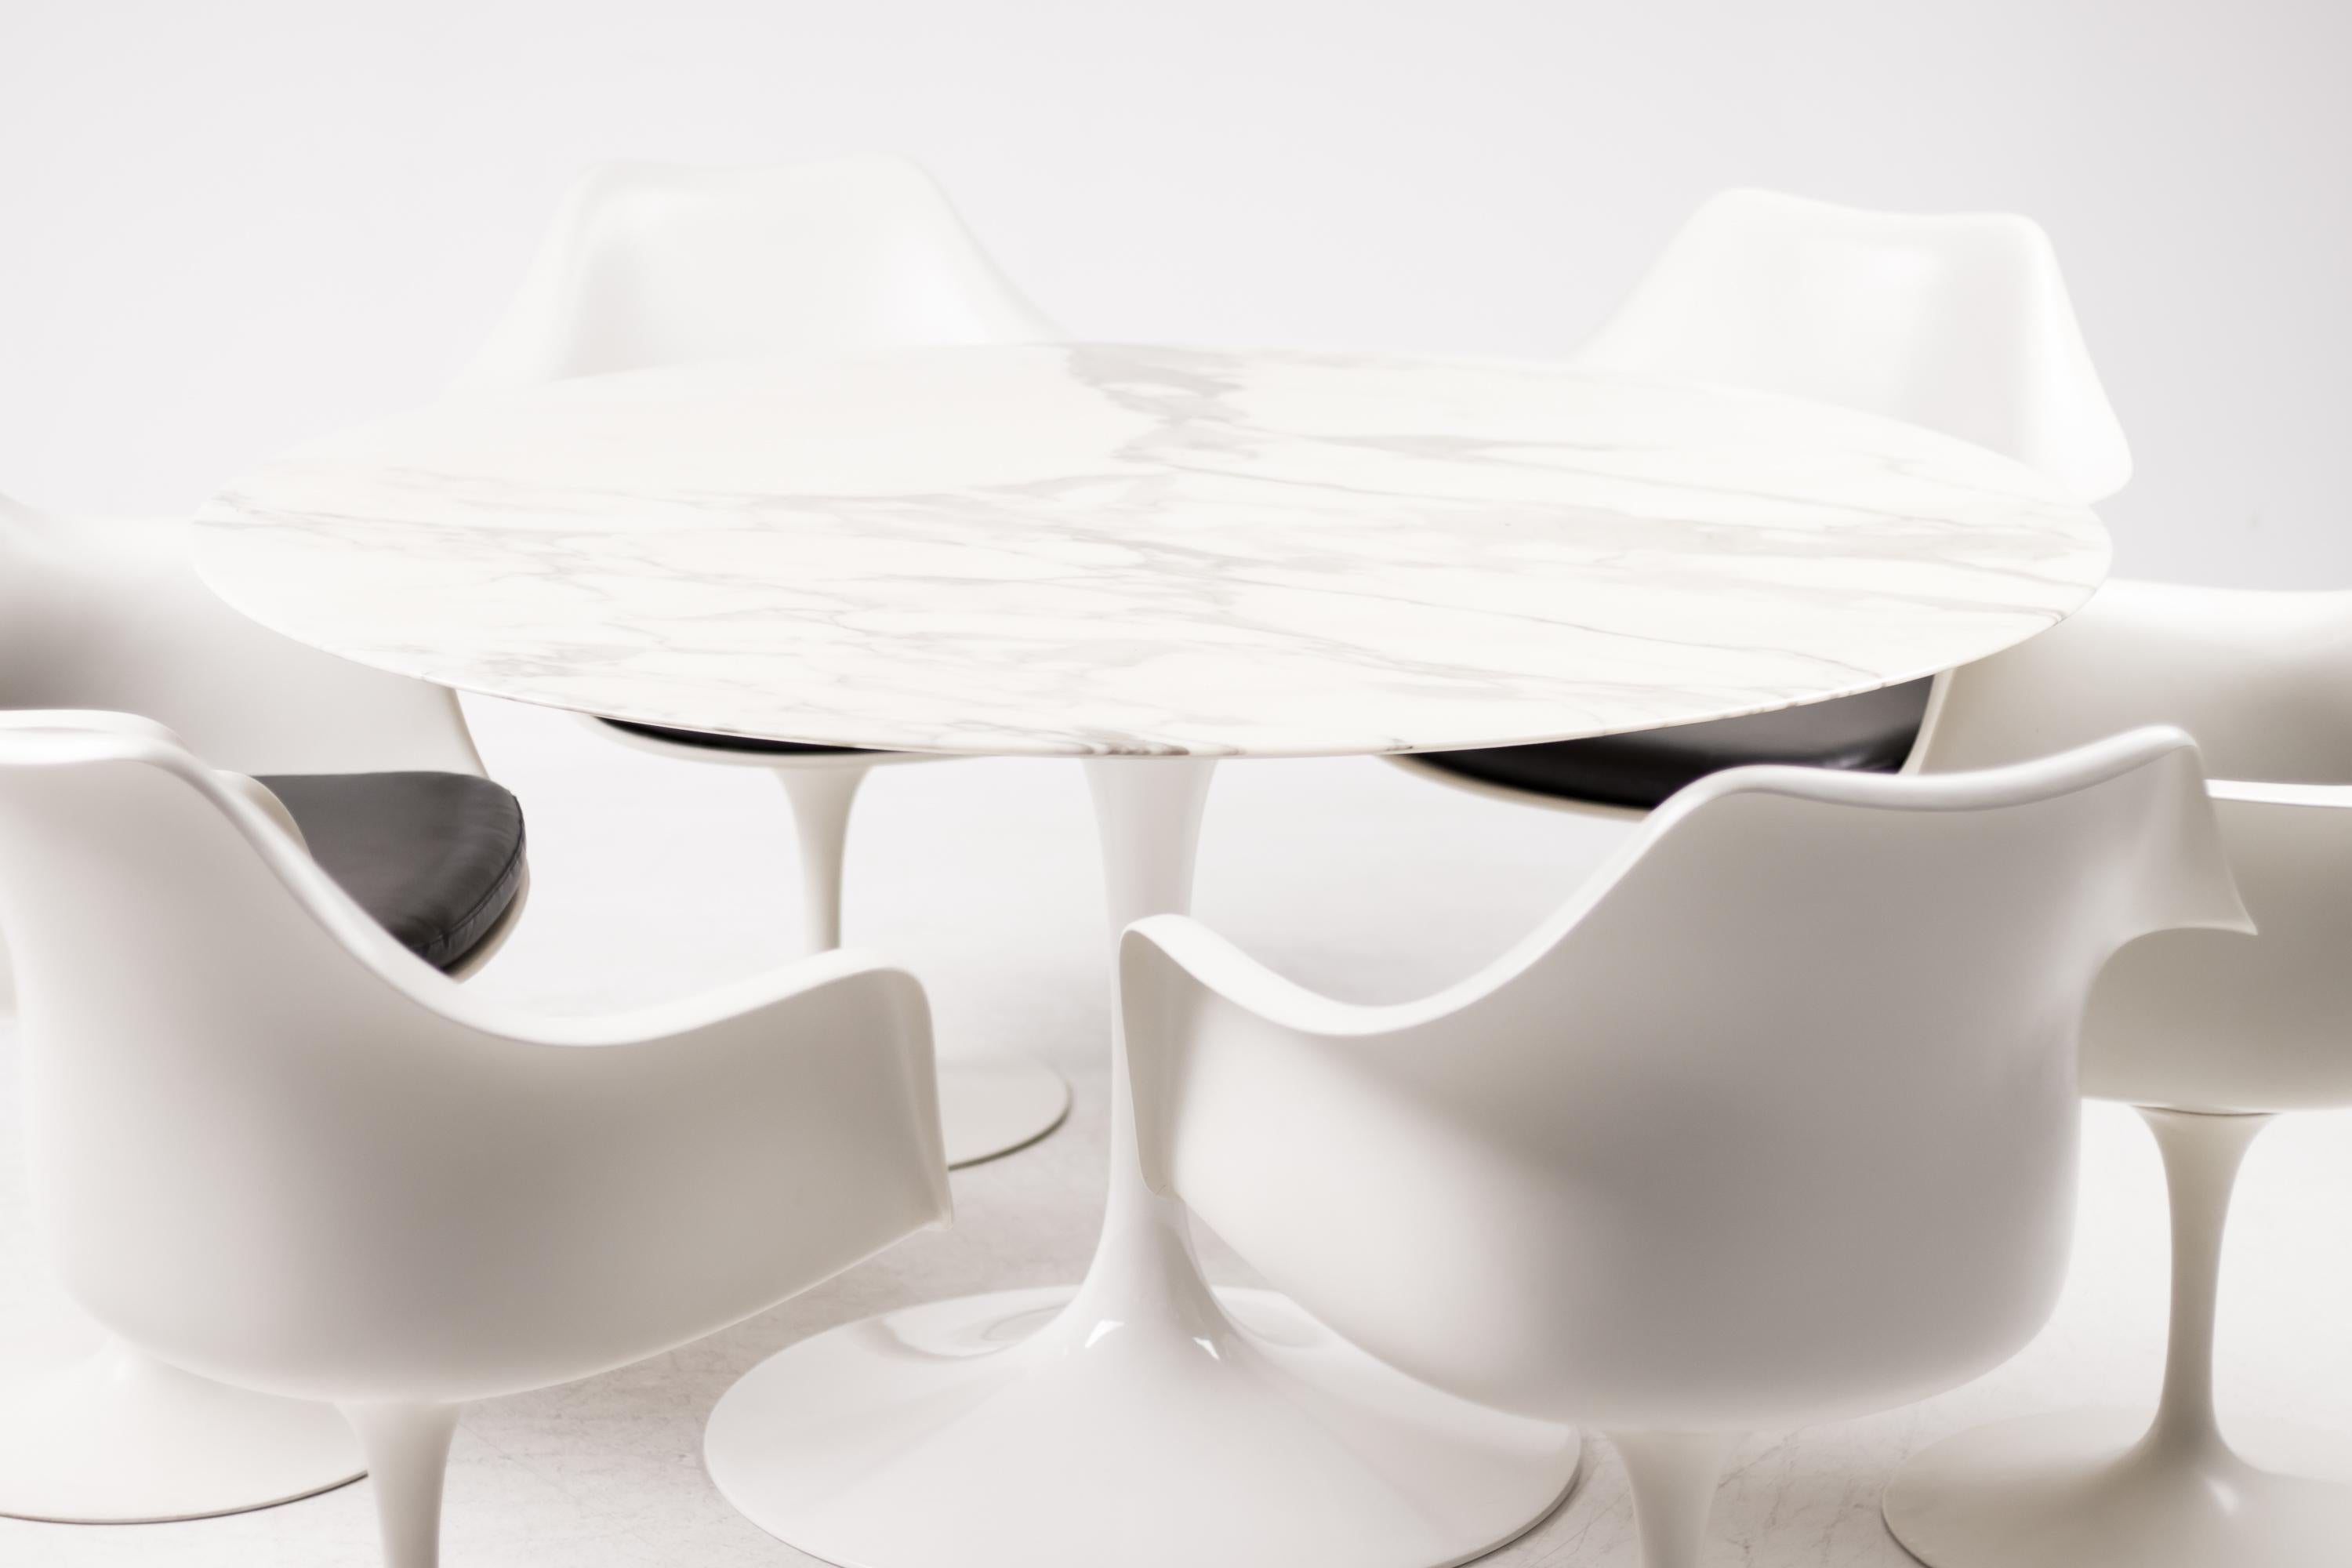 Classic large tulip dining table designed by Eero Saarinen for Knoll International in the most desirable Calacatta marble.
A defining accomplishment of modern design and a timeless addition to your home—a true Classic.
Logo embossed in pedestal